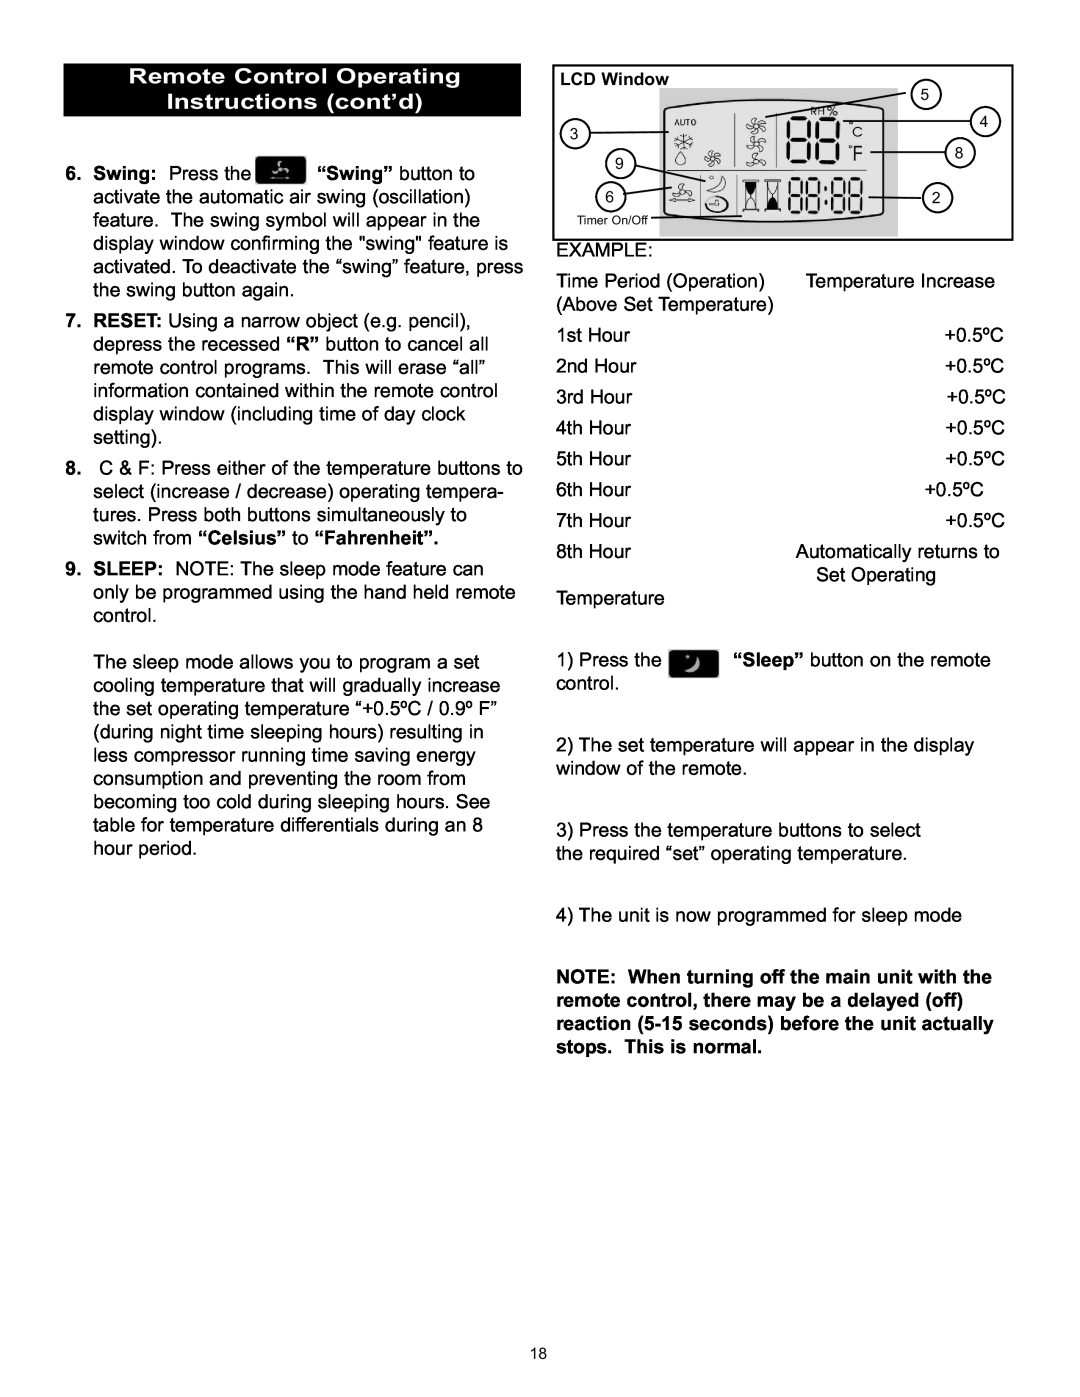 Danby DPAC120061 owner manual Remote Control Operating Instructions cont’d, rnal Water Tank Feature Works 